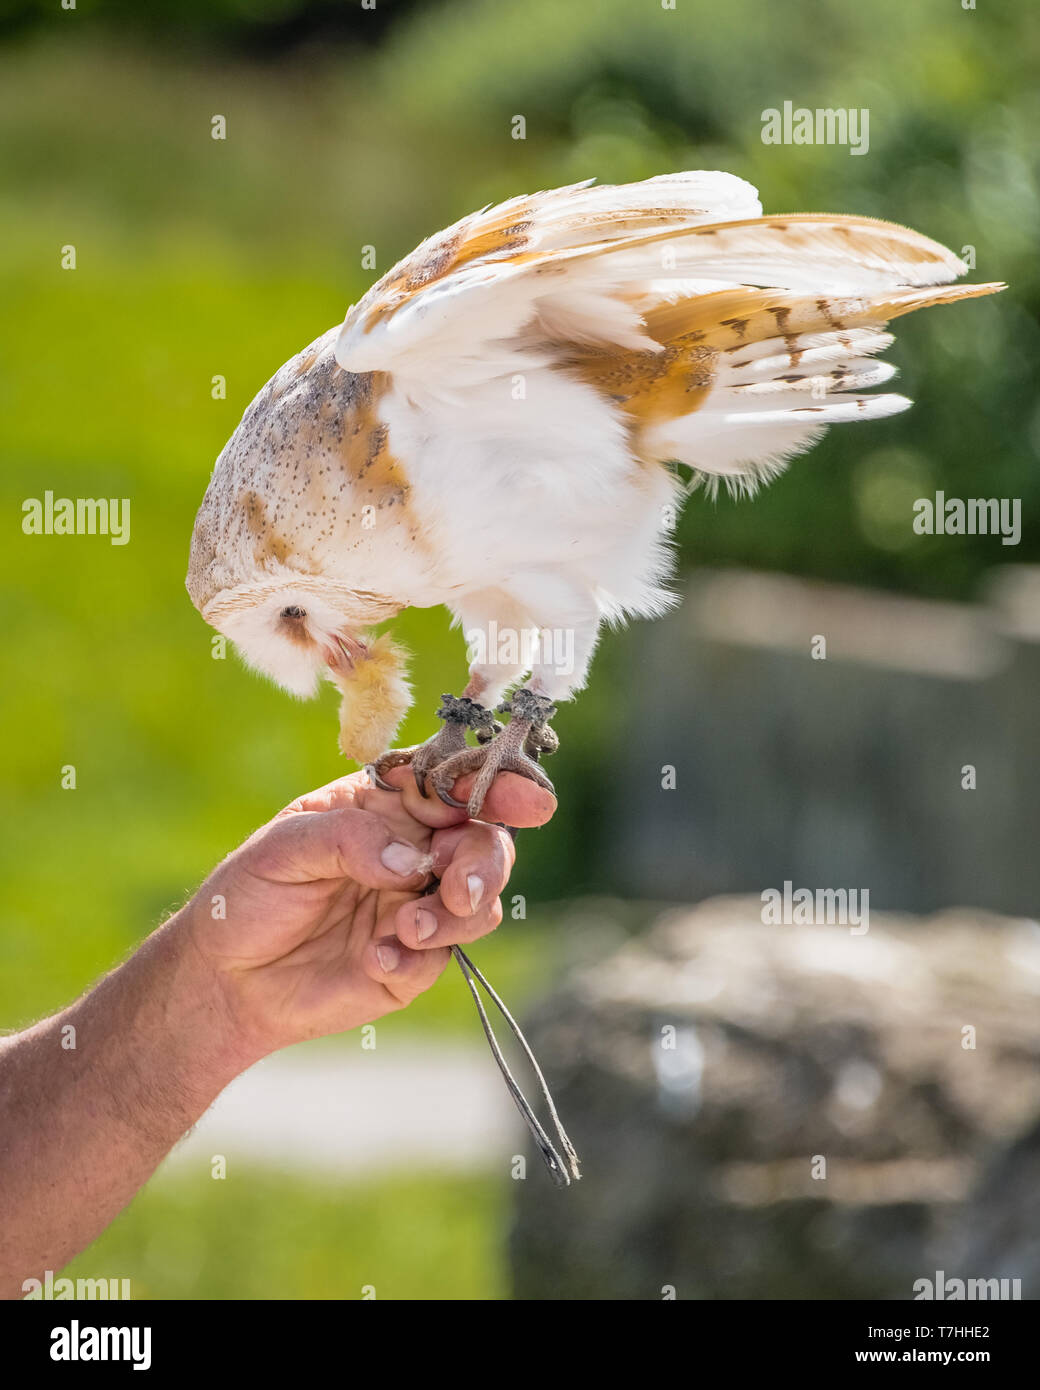 A Common Barn Owl (Tyto alba) stoops down whilst perched and tethered to a falconer’s left hand forefinger to feed on a small piece of fluffy carrion. Stock Photo